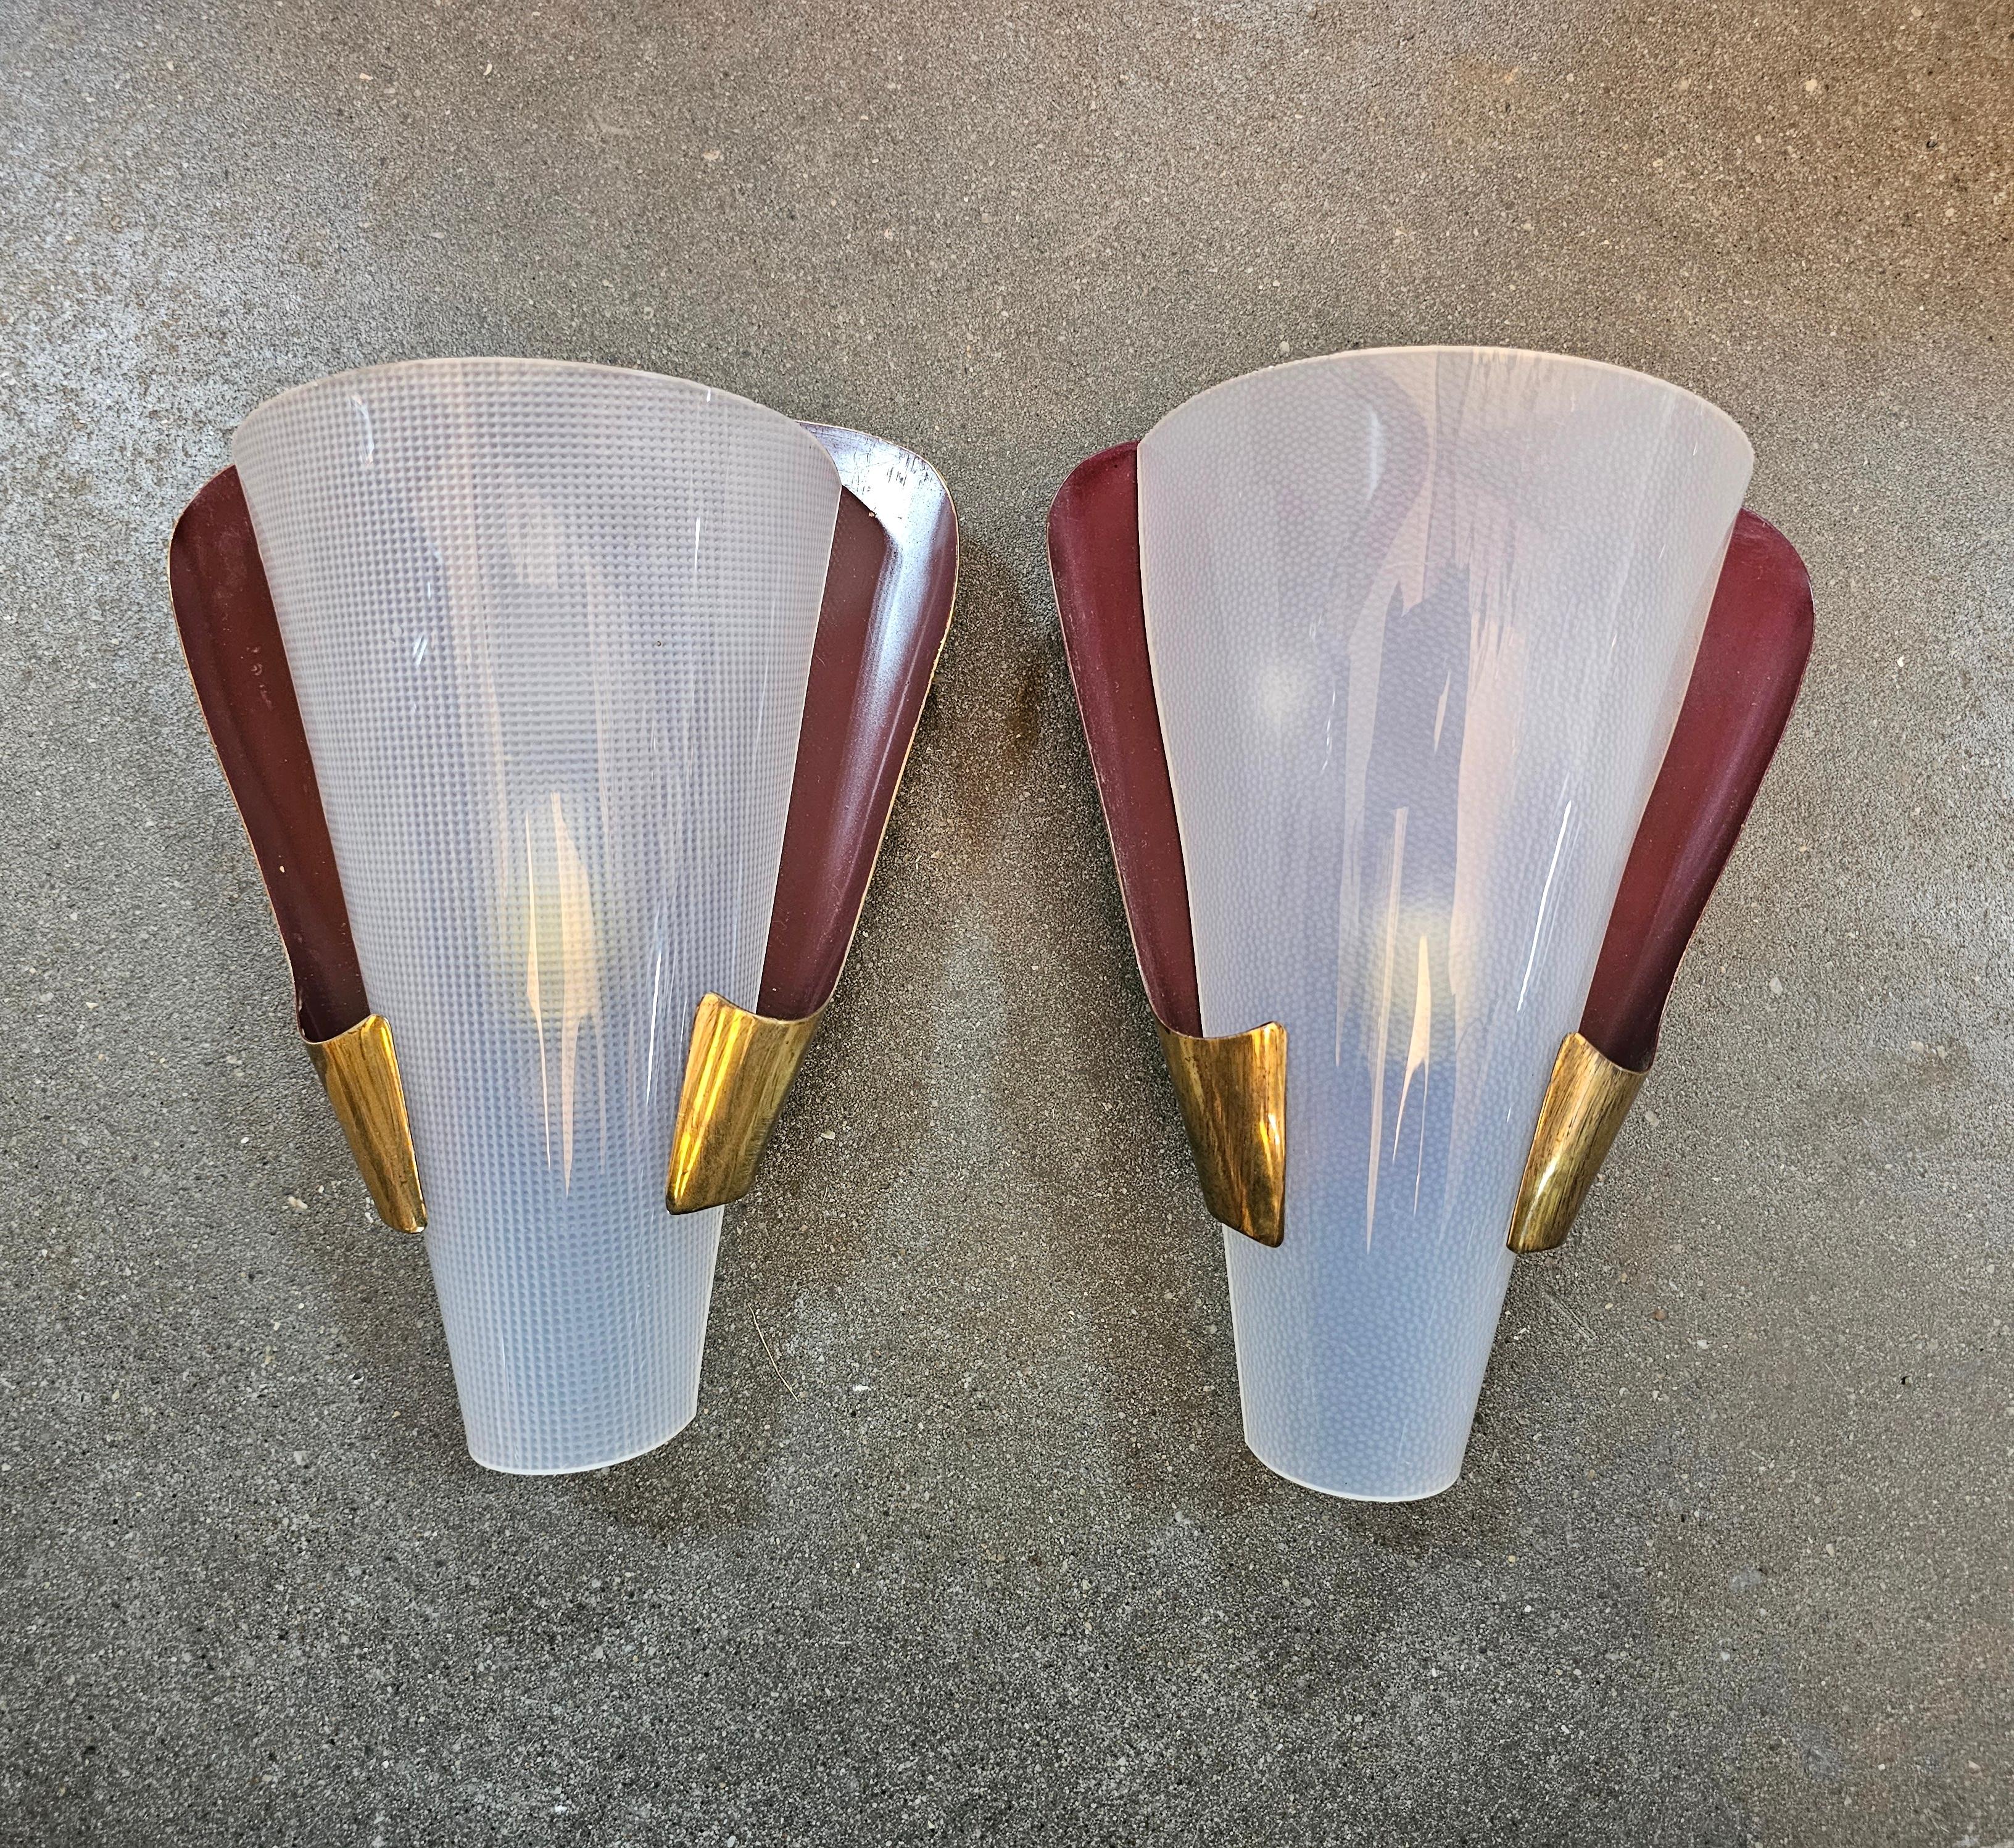 Pair of Mid Cnetury Modern Brass Sconces attr. to Stilnovo, Italy 1950s For Sale 1